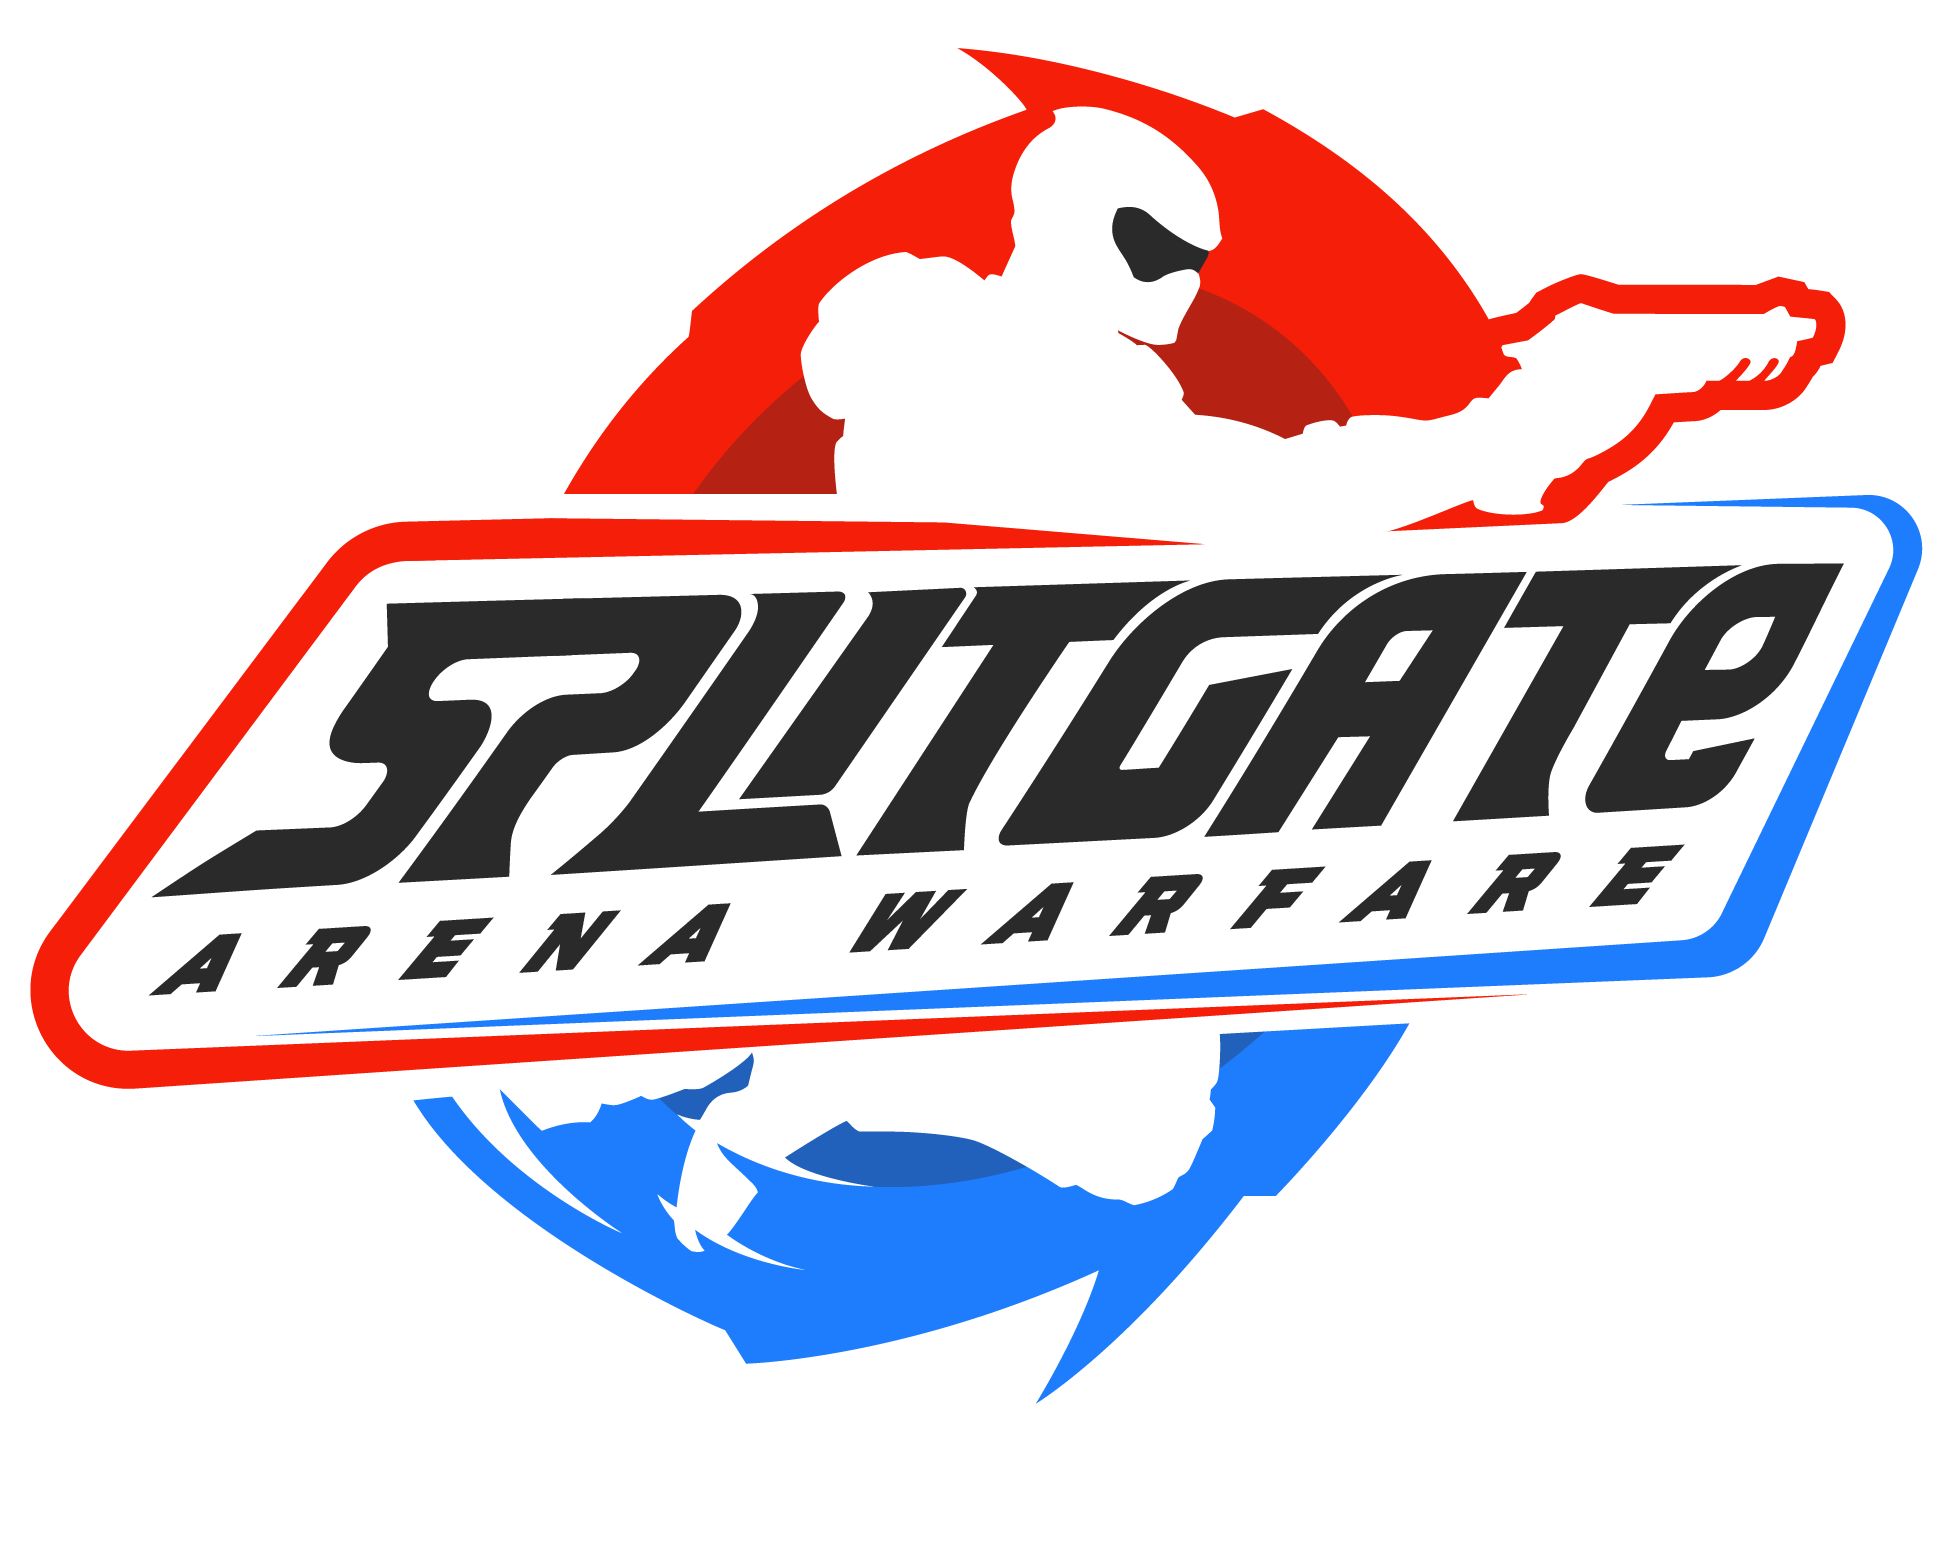 Interview: Hexany Audio Discusses Creating the Sound Effects for Splitgate: Arena Warfare